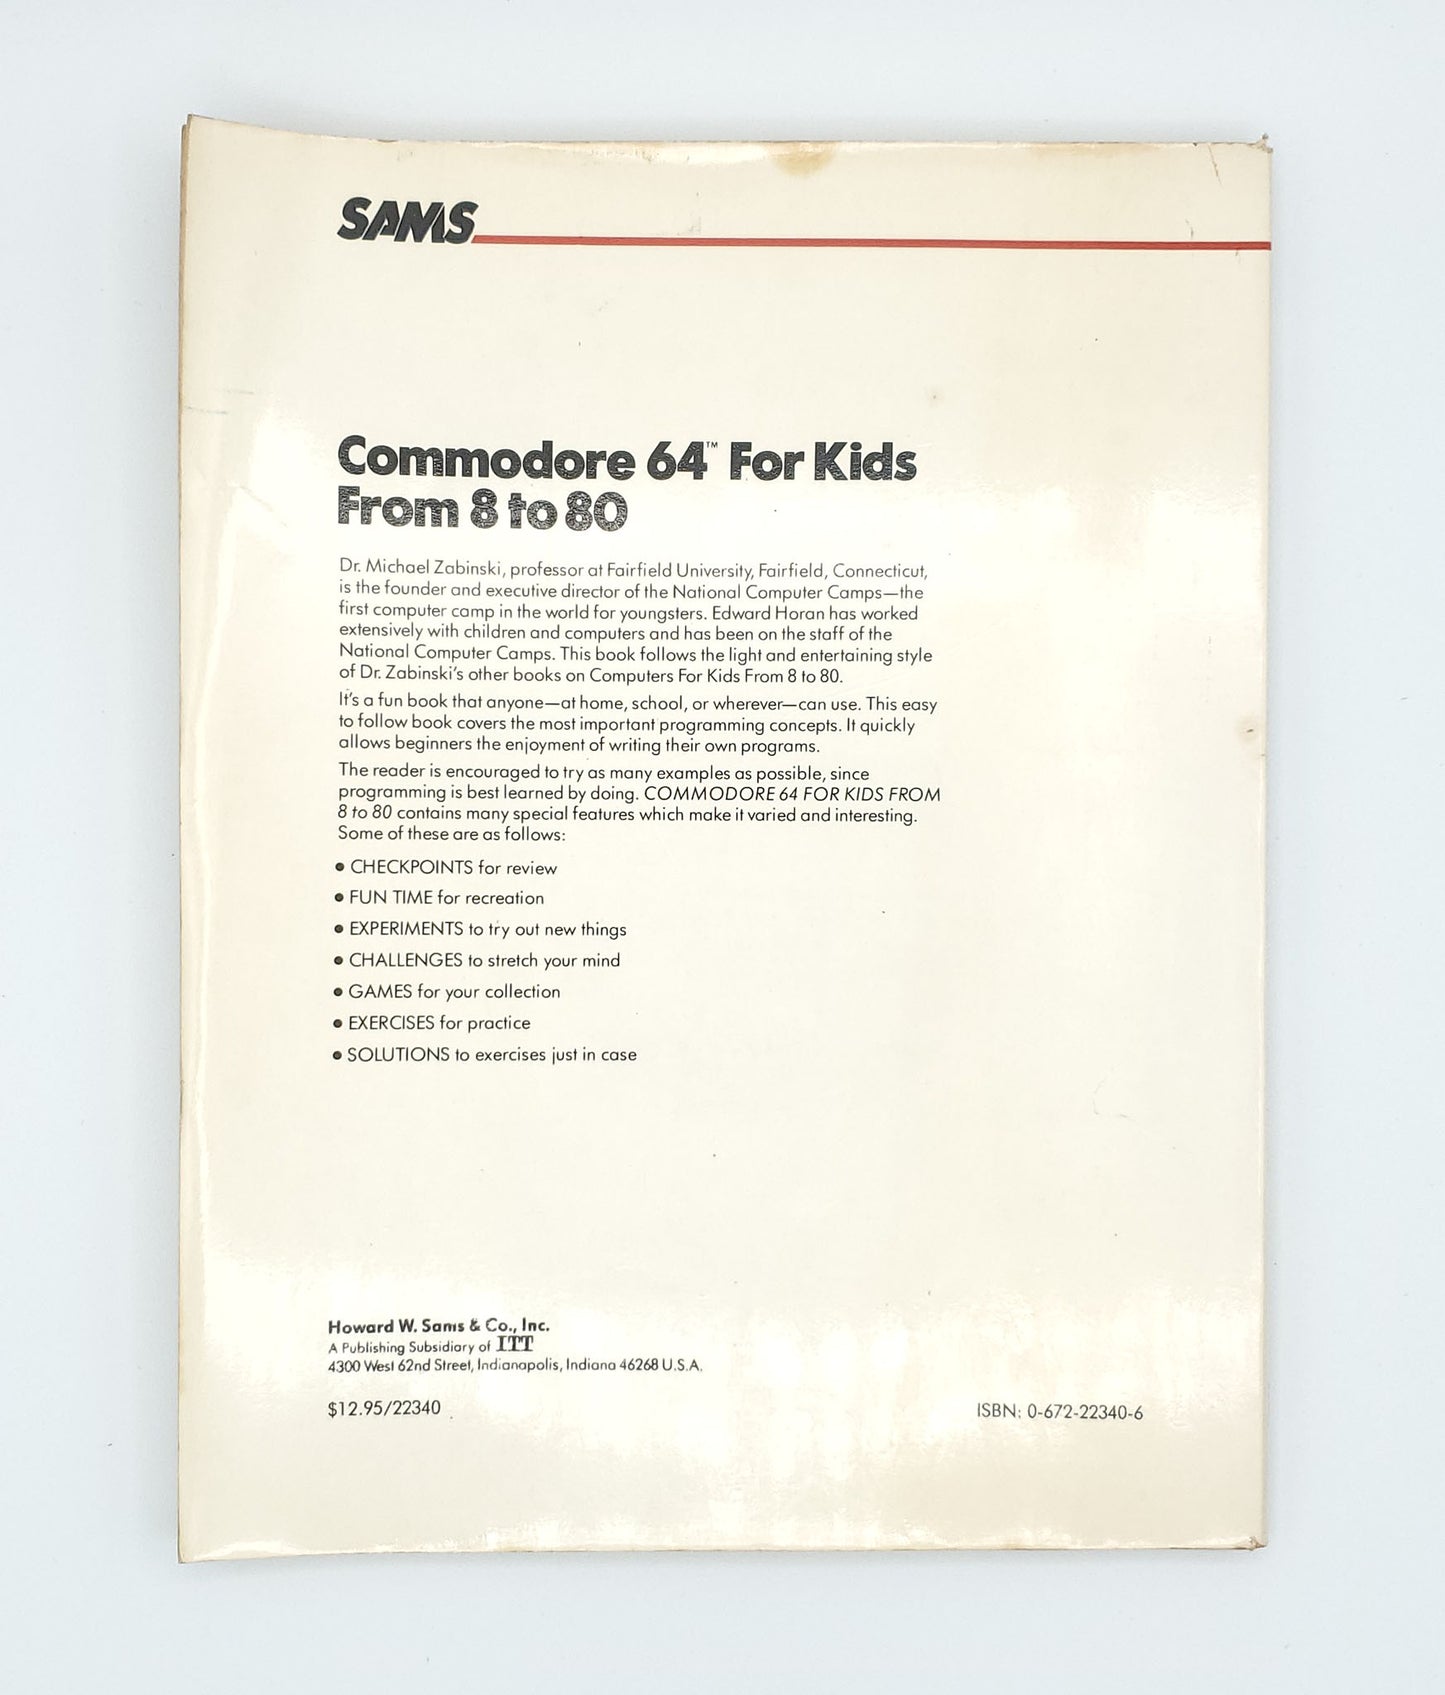 Commodore 64 For Kids From 8 to 80